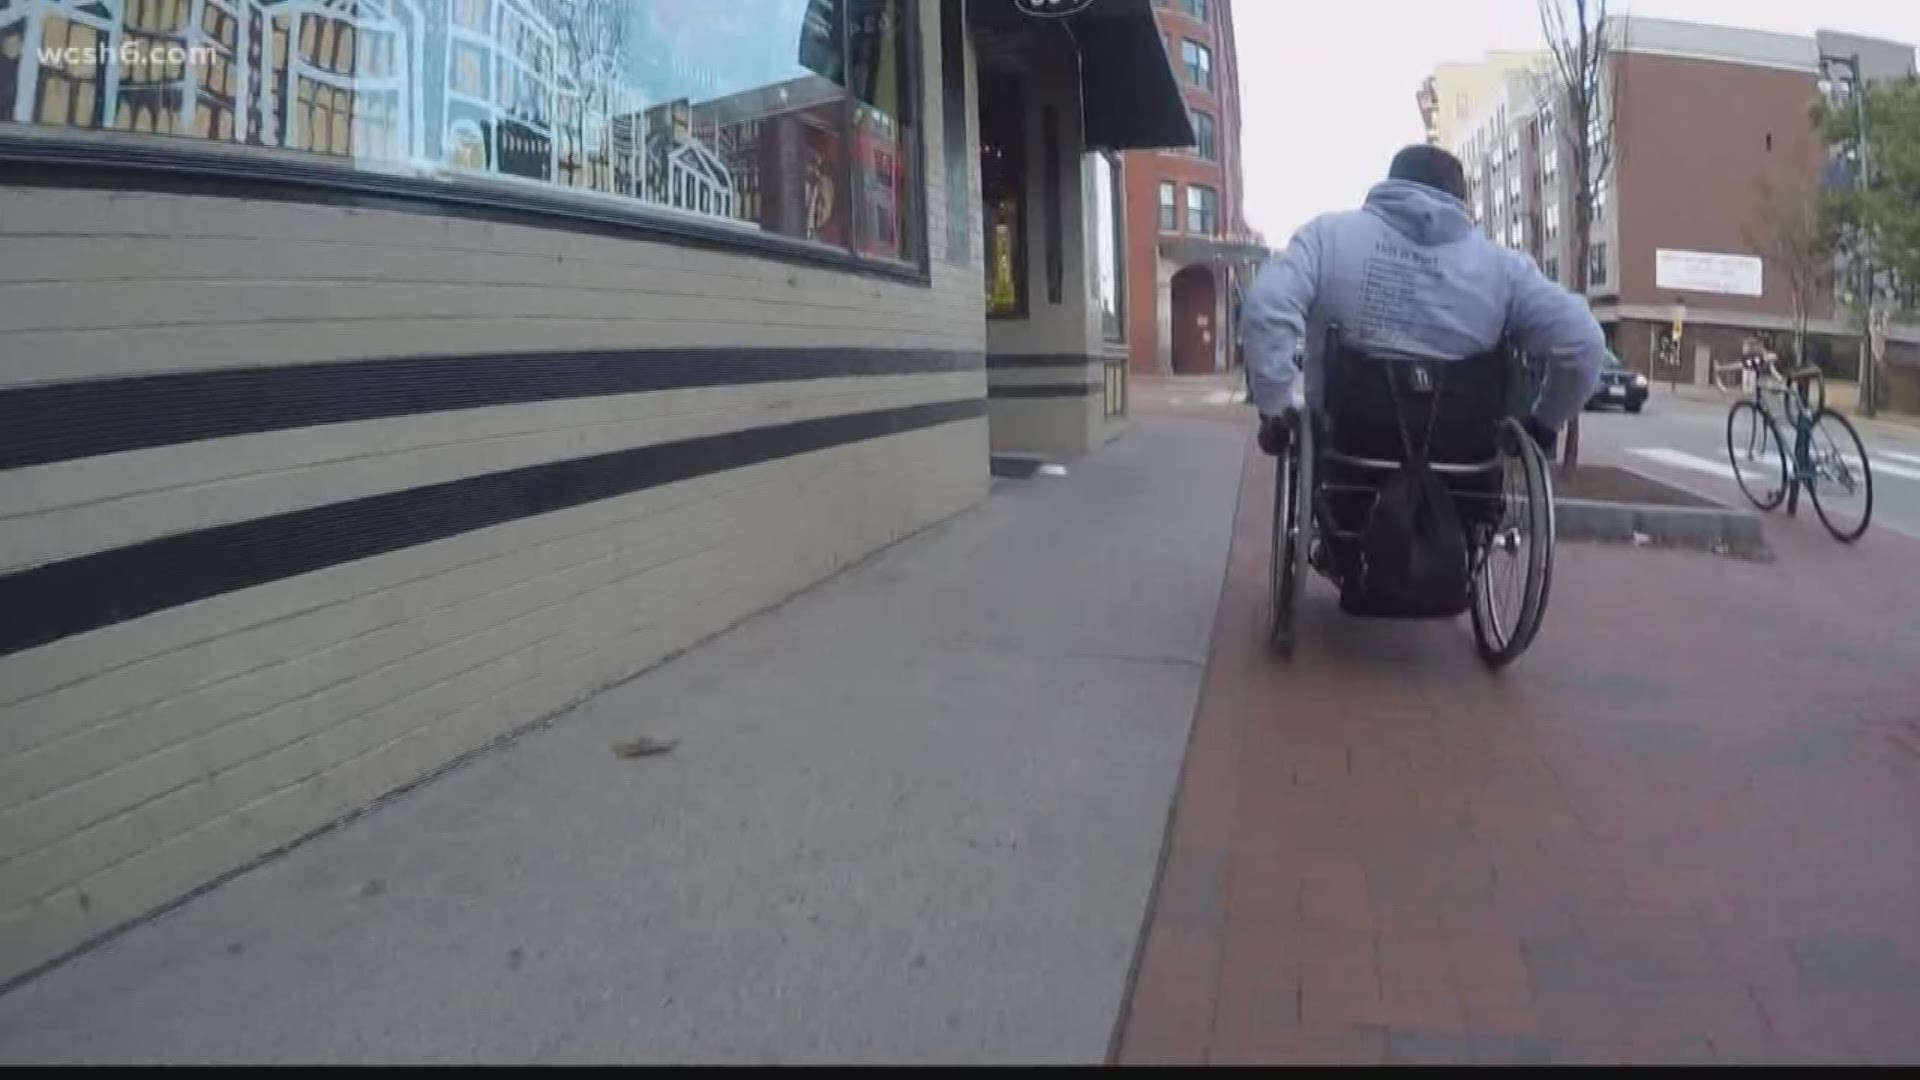 NOW: The streets of Portland are not exactly wheelchair-friendly